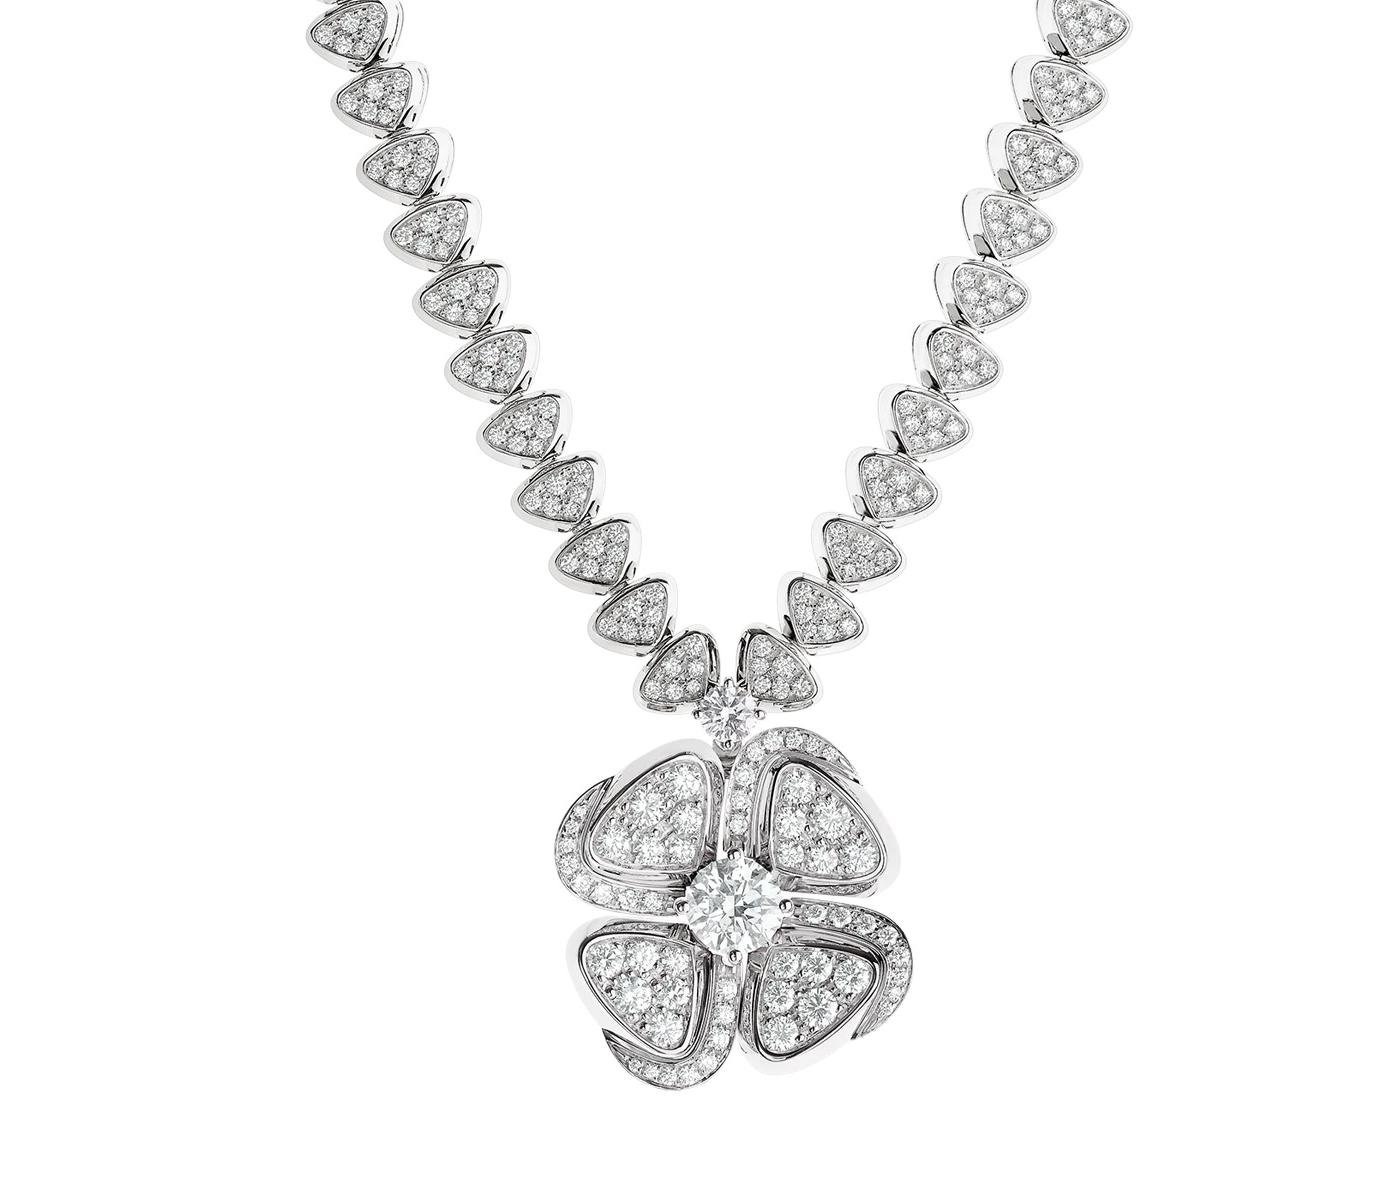 Necklace by Bulgari